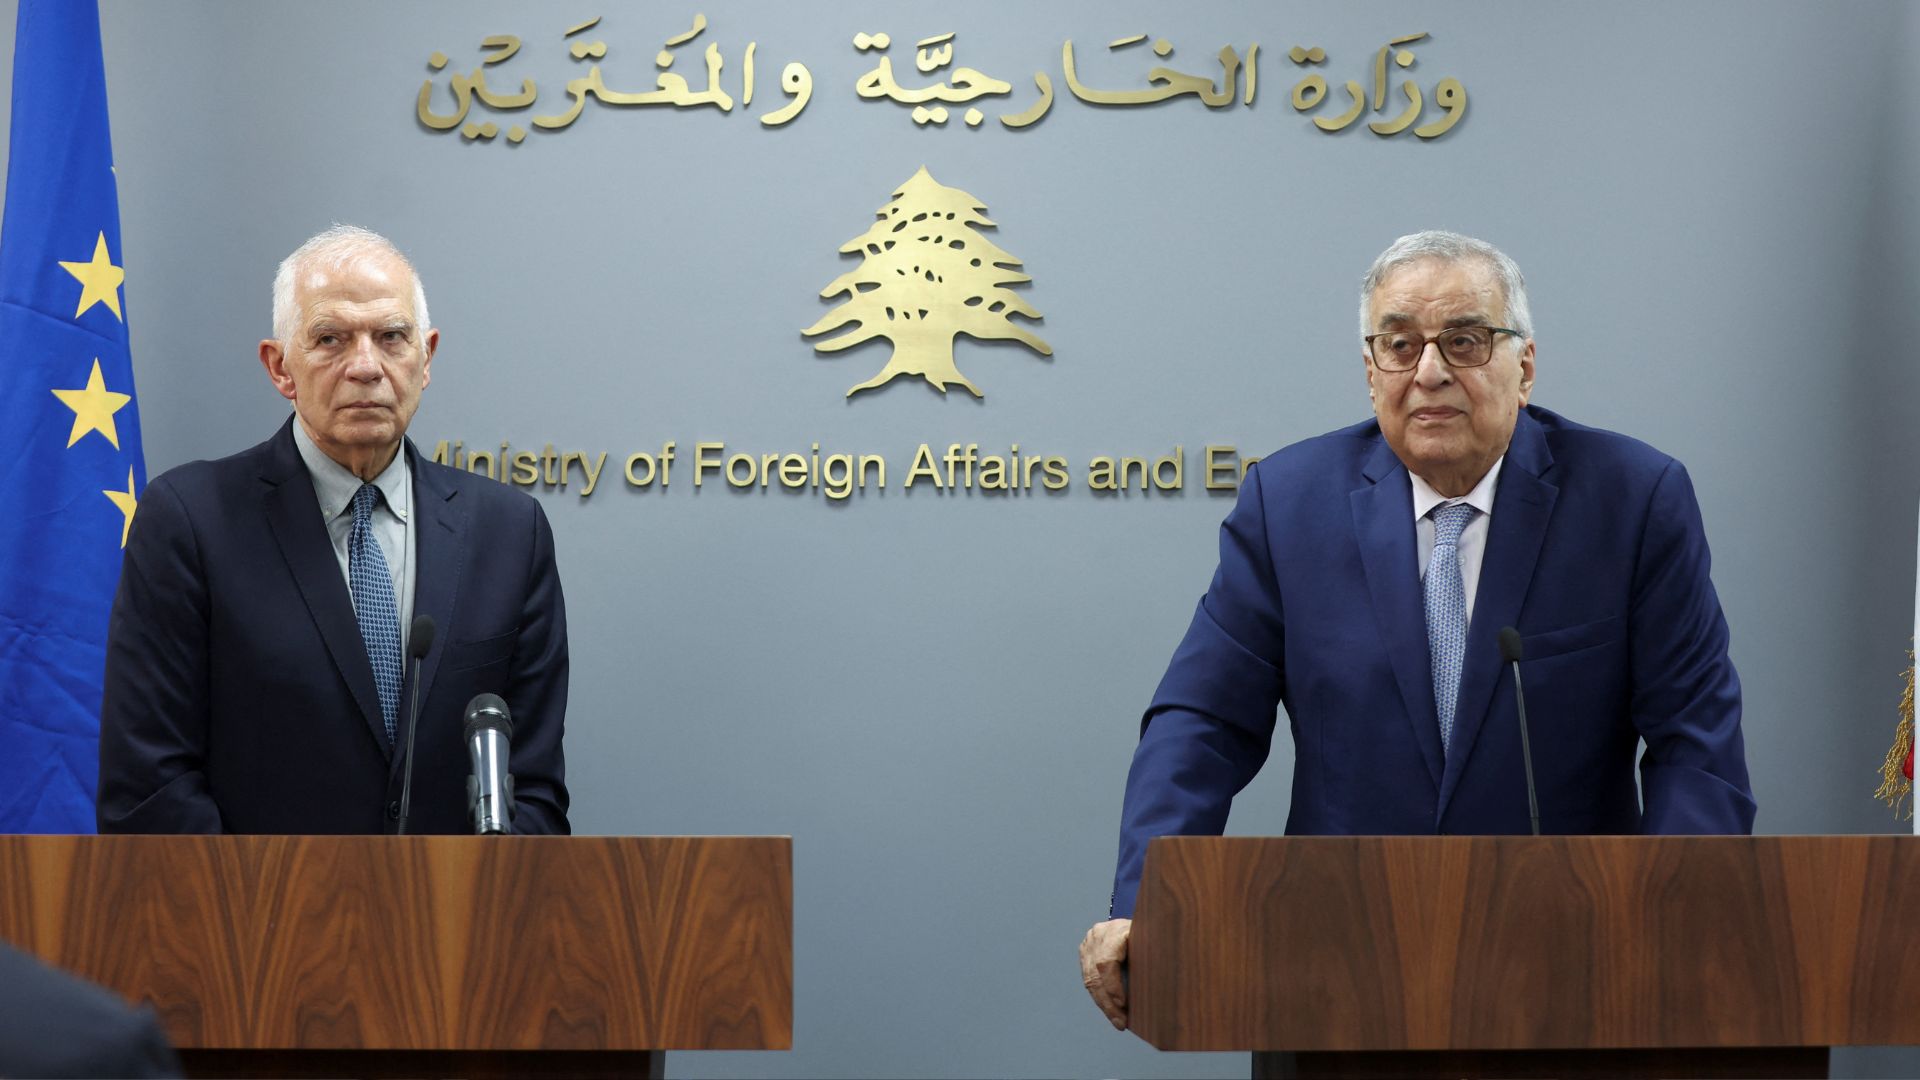 Borrell met with Habib in Beirut as part of a tour of the region that includes a trip to Saudi Arabia./Mohamed Azakir/Reuters